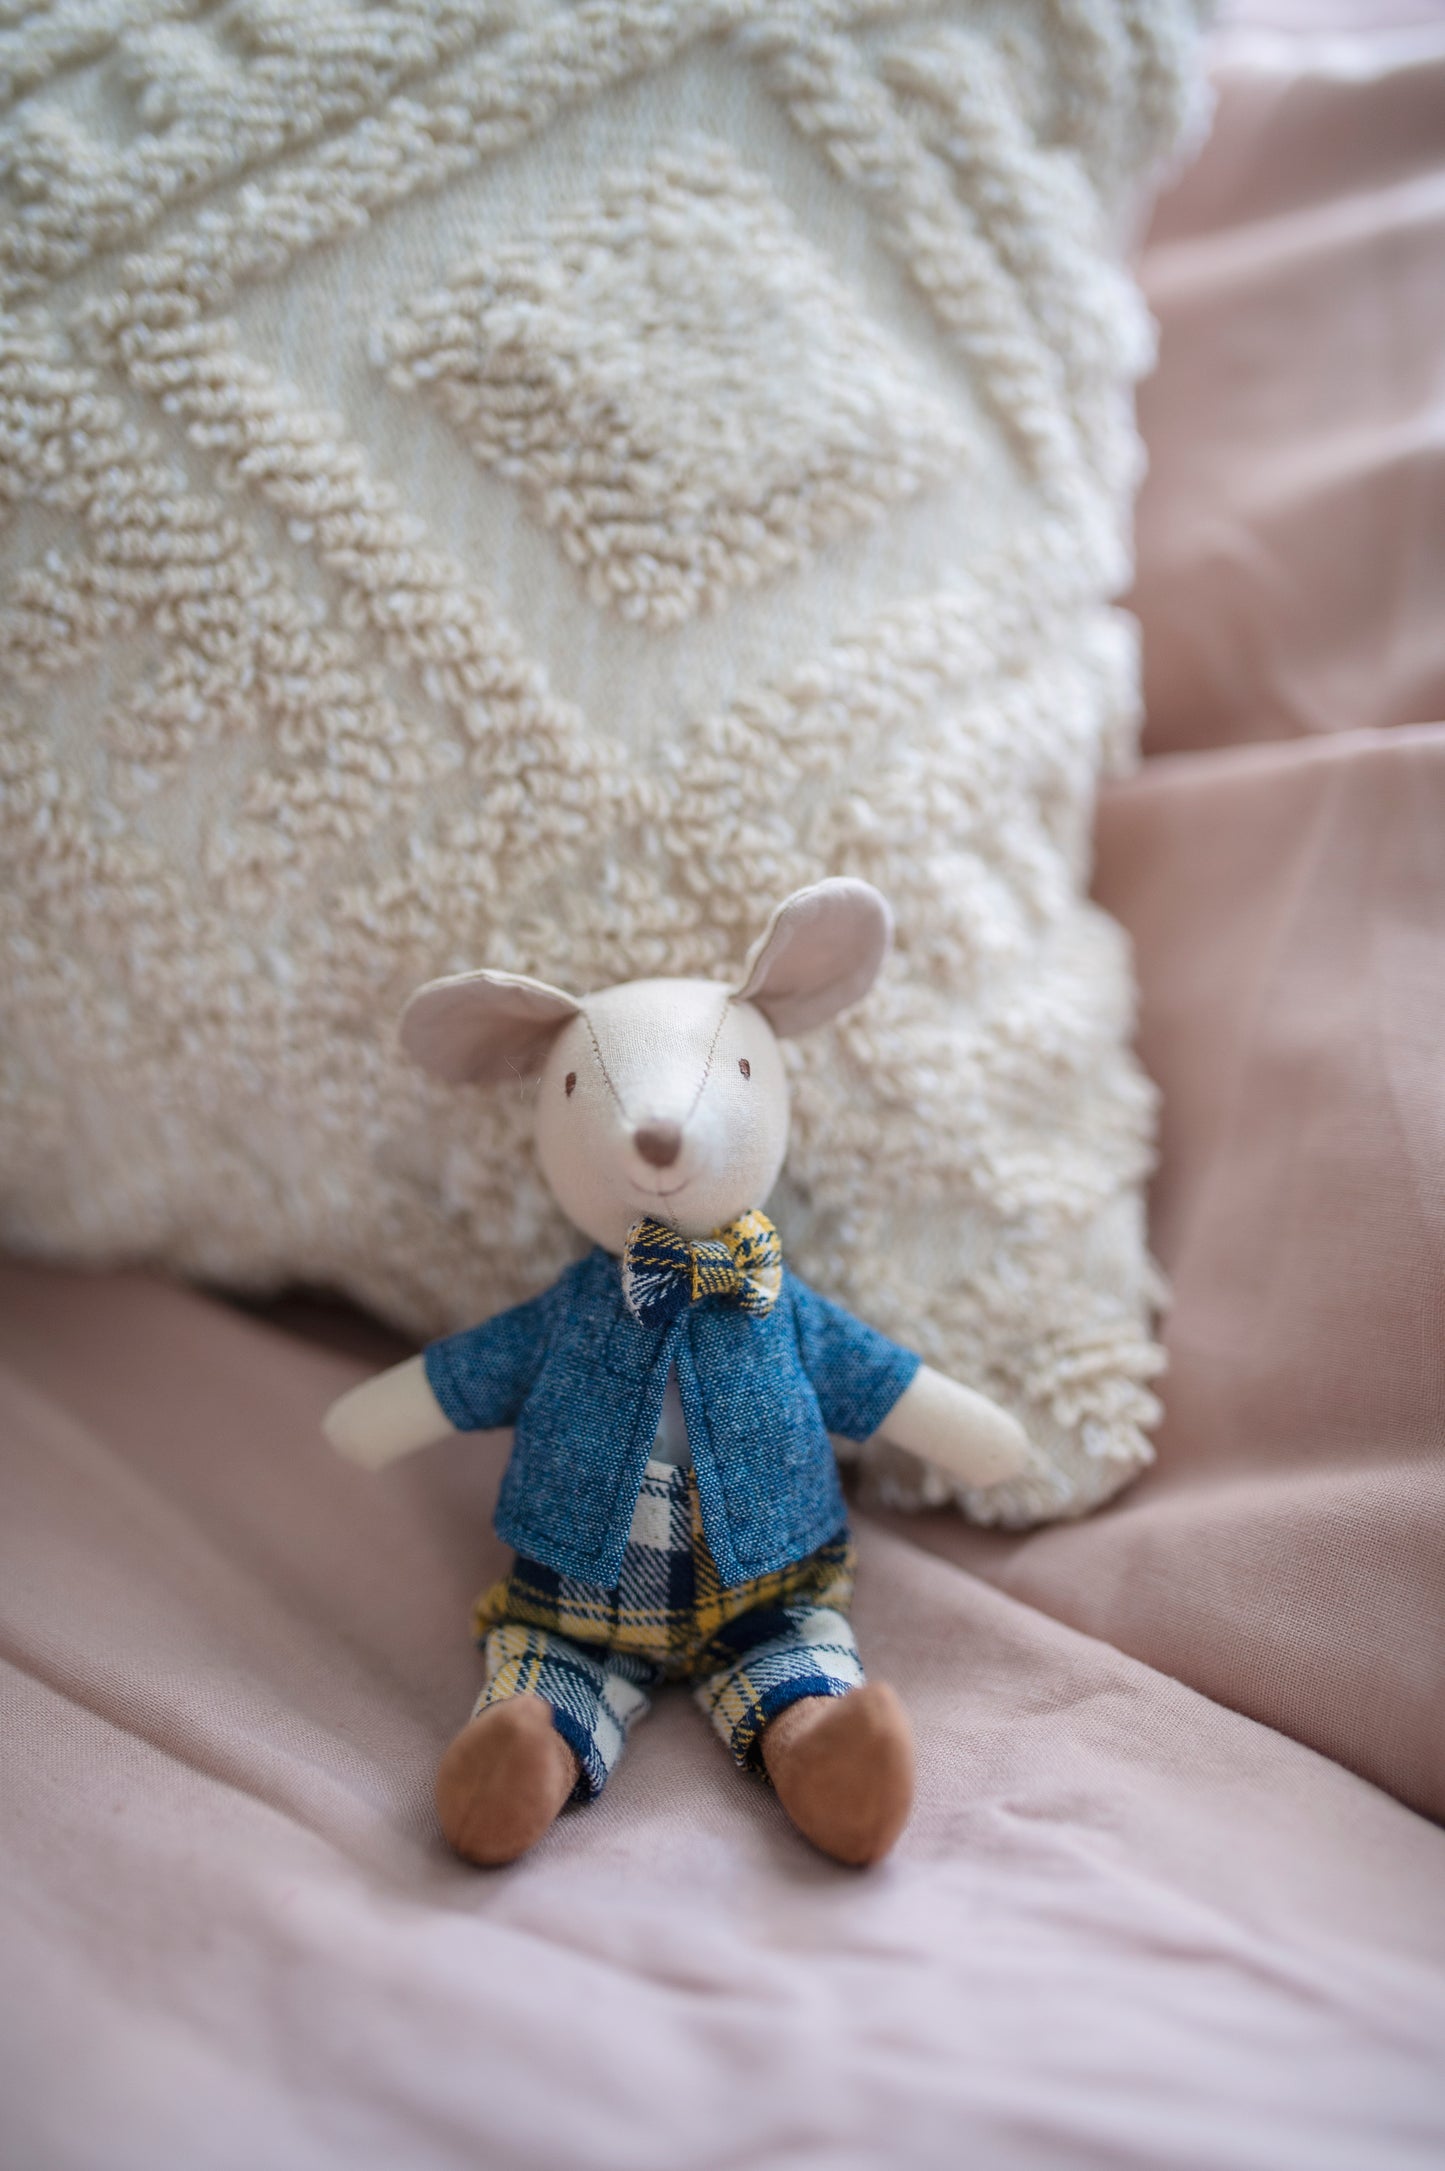 archie the mouse mini doll